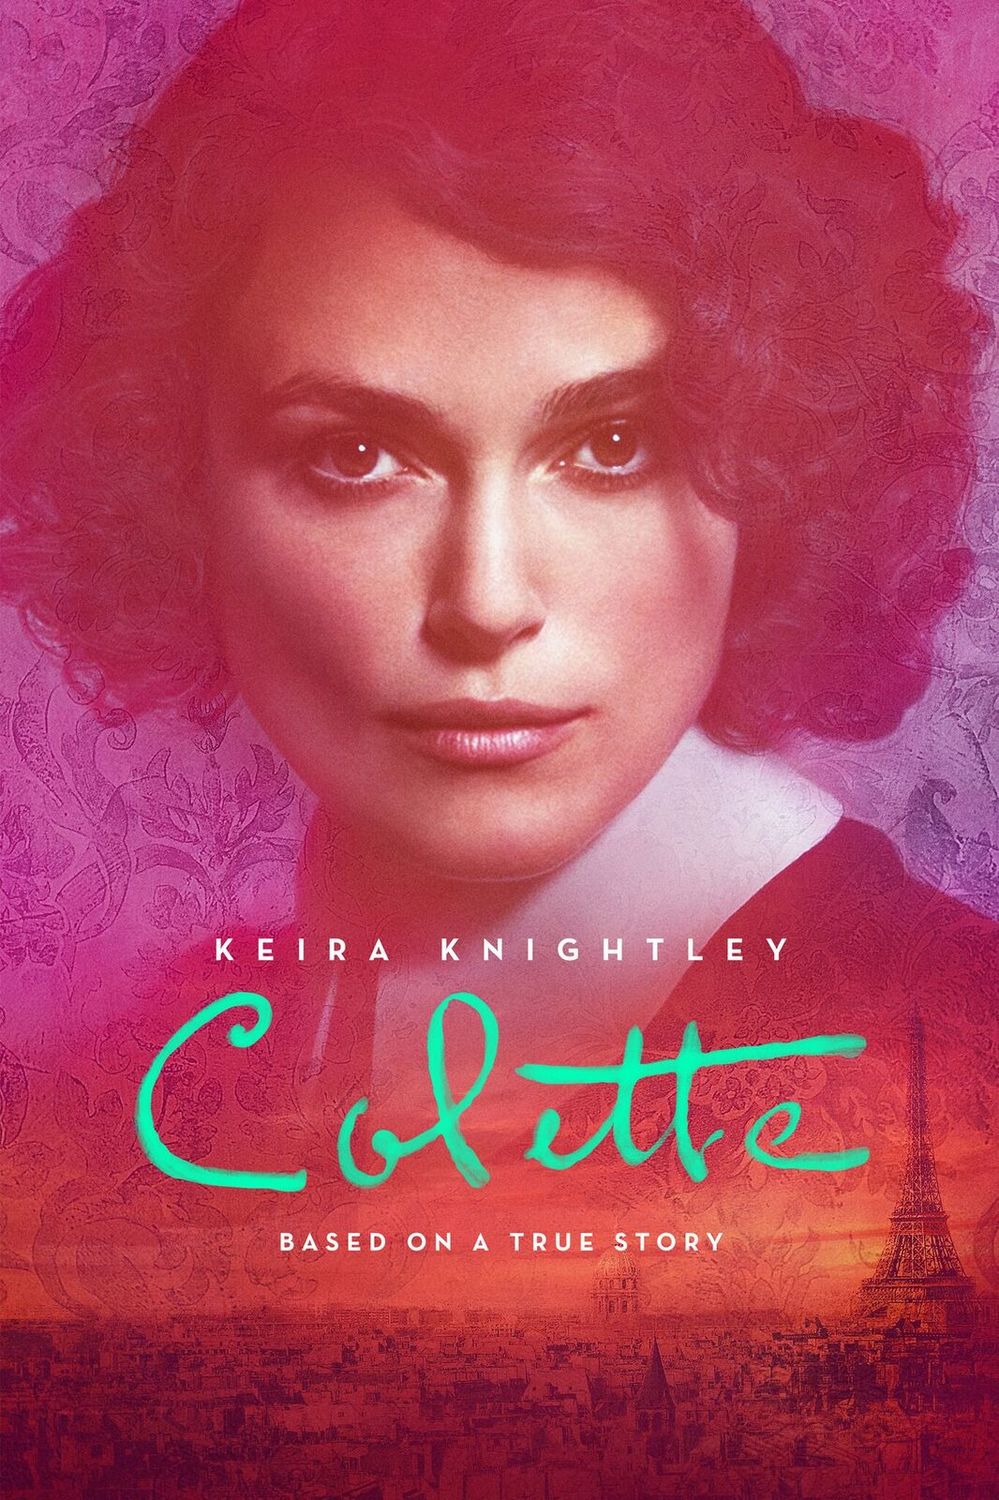 Colette [DVD] (2018).  Directed by Wash Westmoreland.